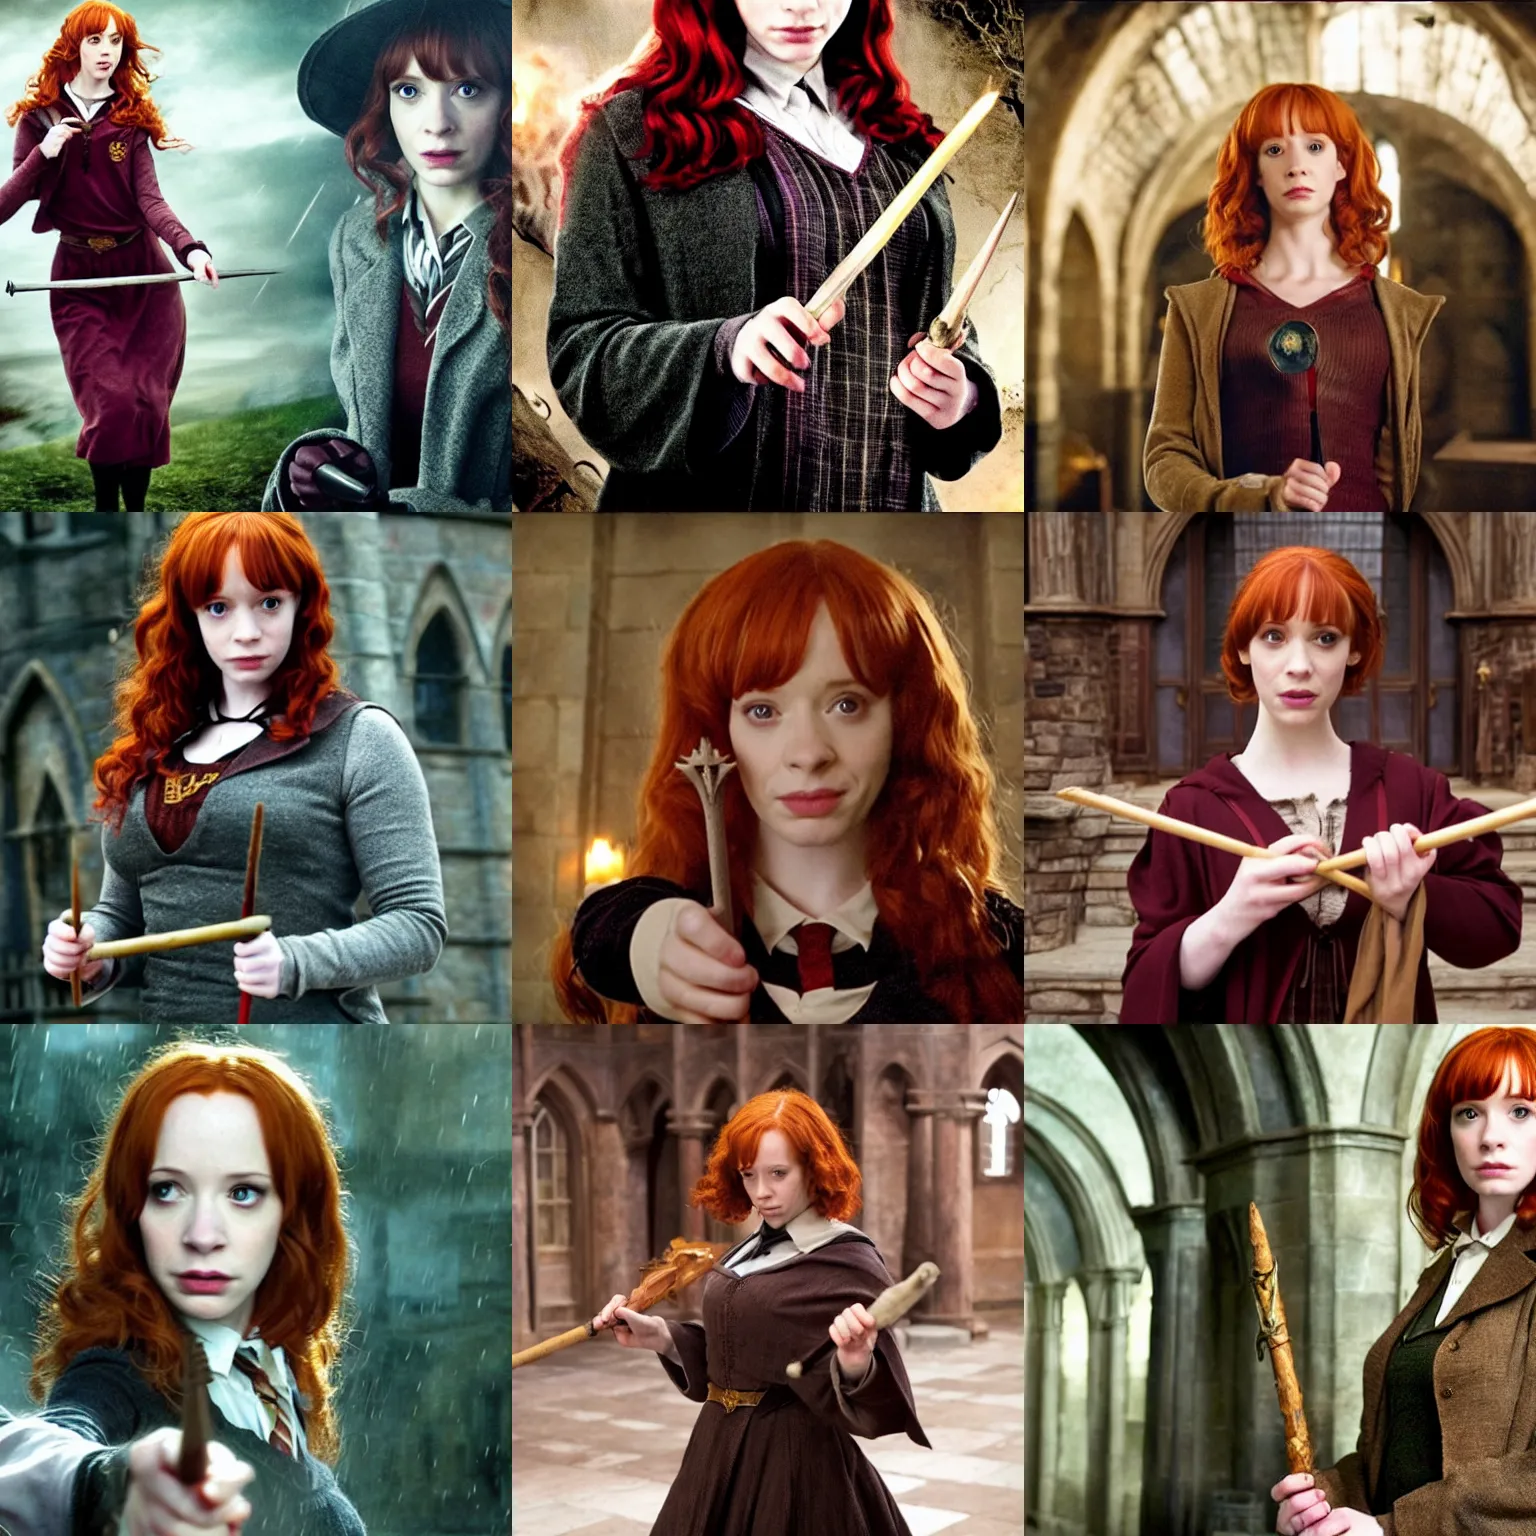 Prompt: female hogwarts student holding wand played by amazing beautiful christina hendricks, movie still harry potter and the deathly hallows by david yates, film still from the movie directed by denis villeneuve, wide lens